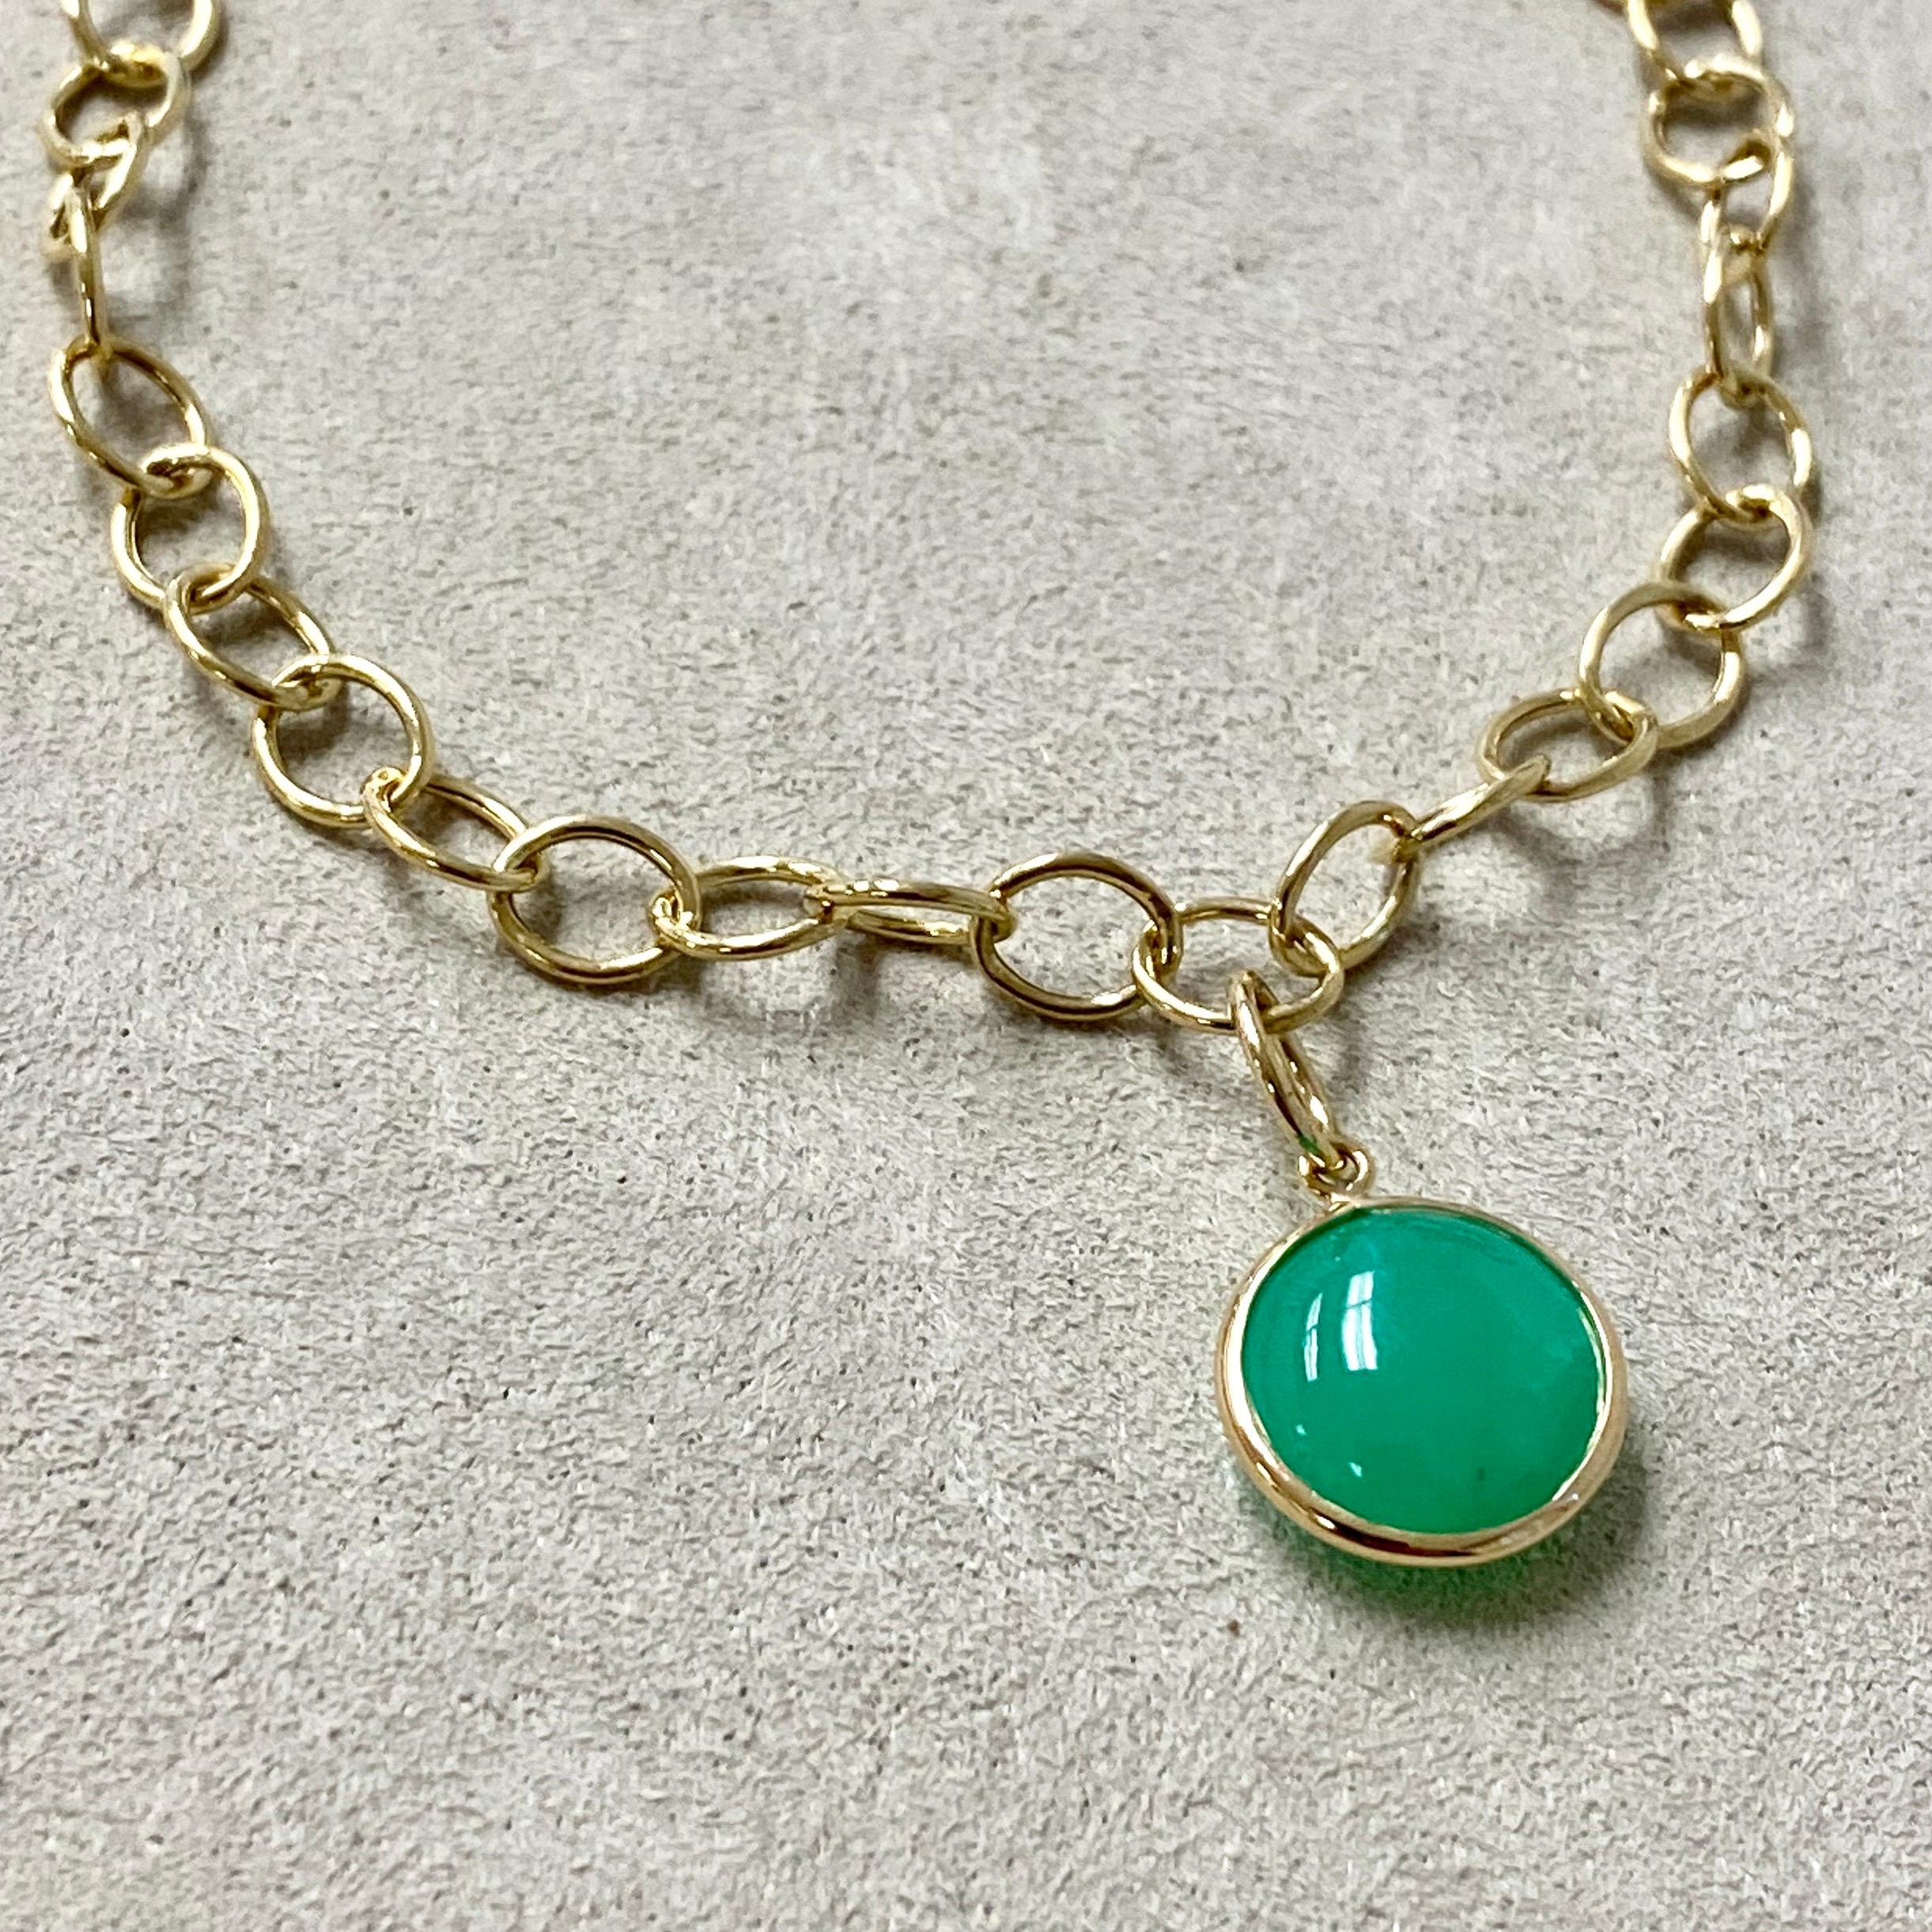 Round Cut Syna Yellow Gold Bracelet with Chrysoprase